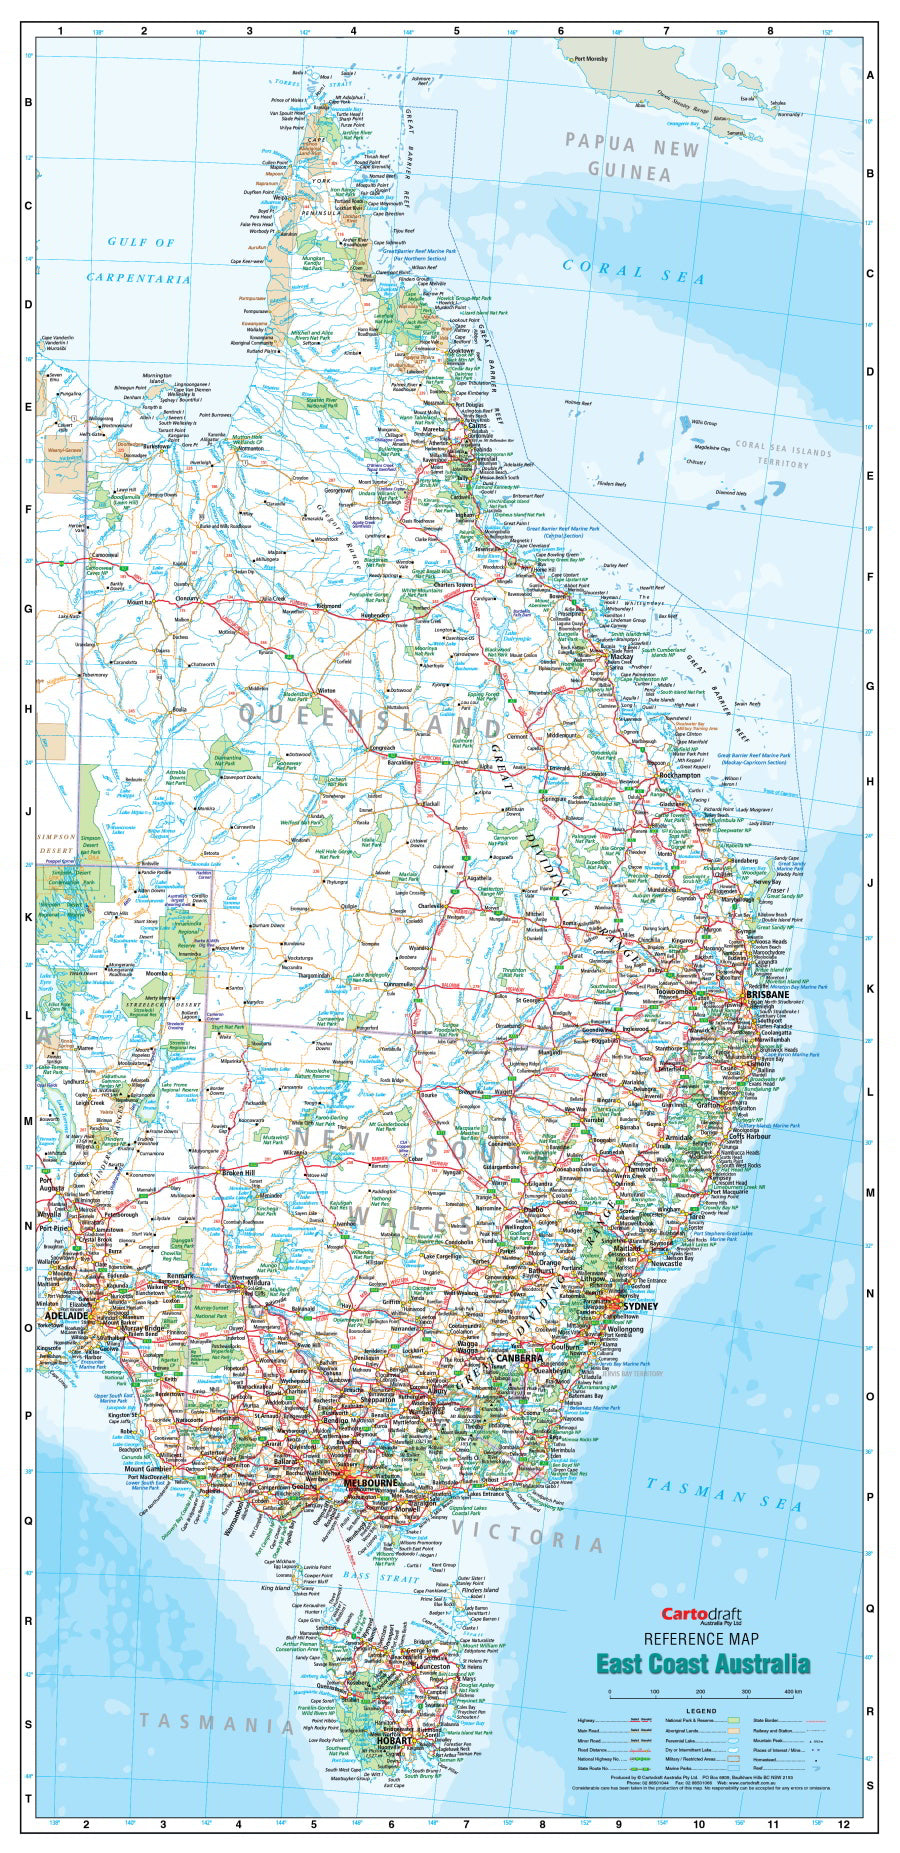 skildring pasta Orator Buy wall map of the East Coast of Australia with hang rails - Mapworld